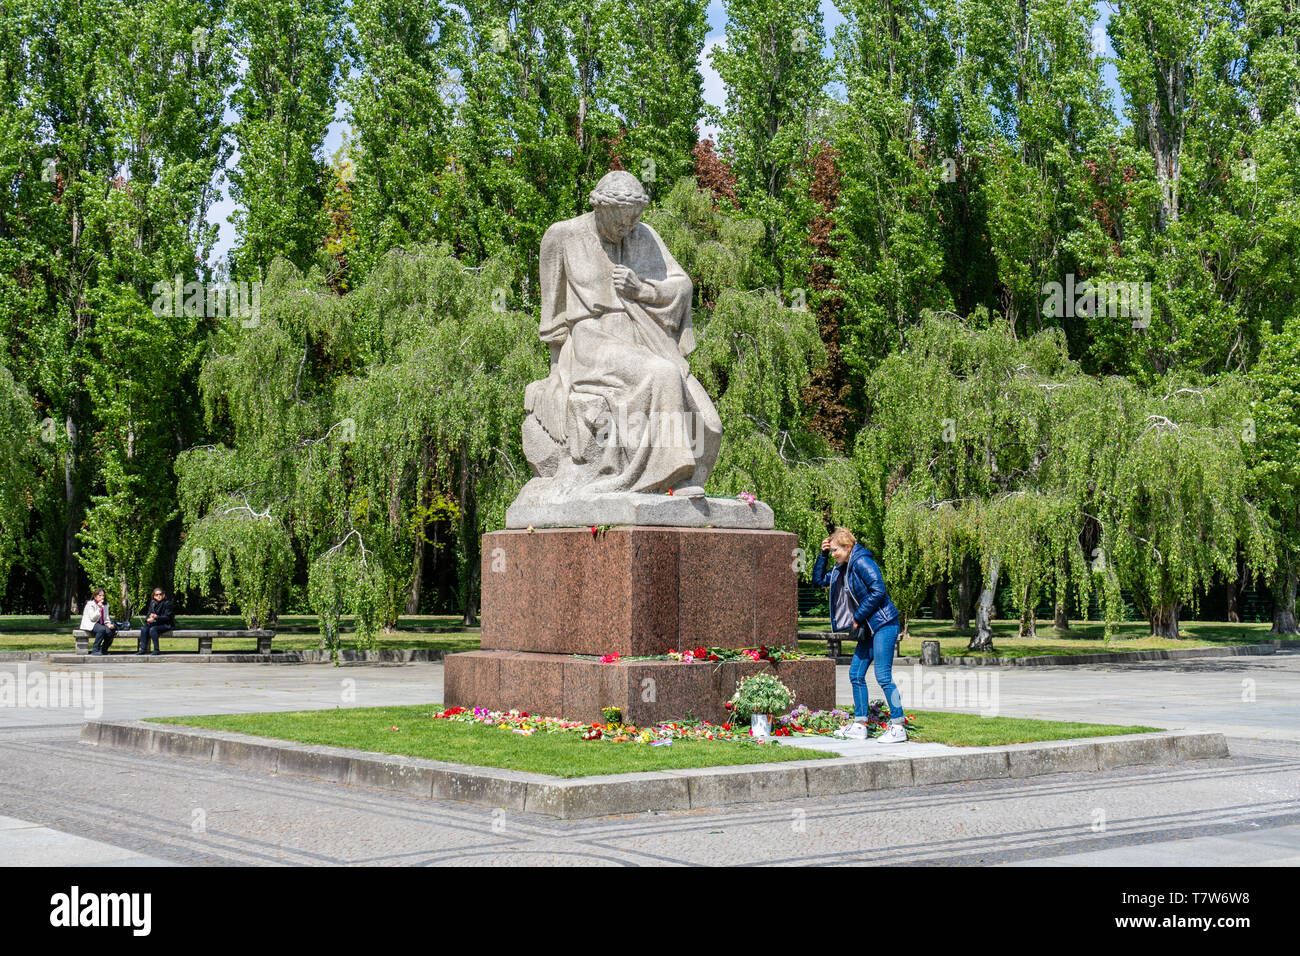 A woman lays flowers at the weeping Motherland statue at the Soviet War Memorial (Sowjetisches Ehrenmal) in Berlin Treptow, Germany Stock Photo